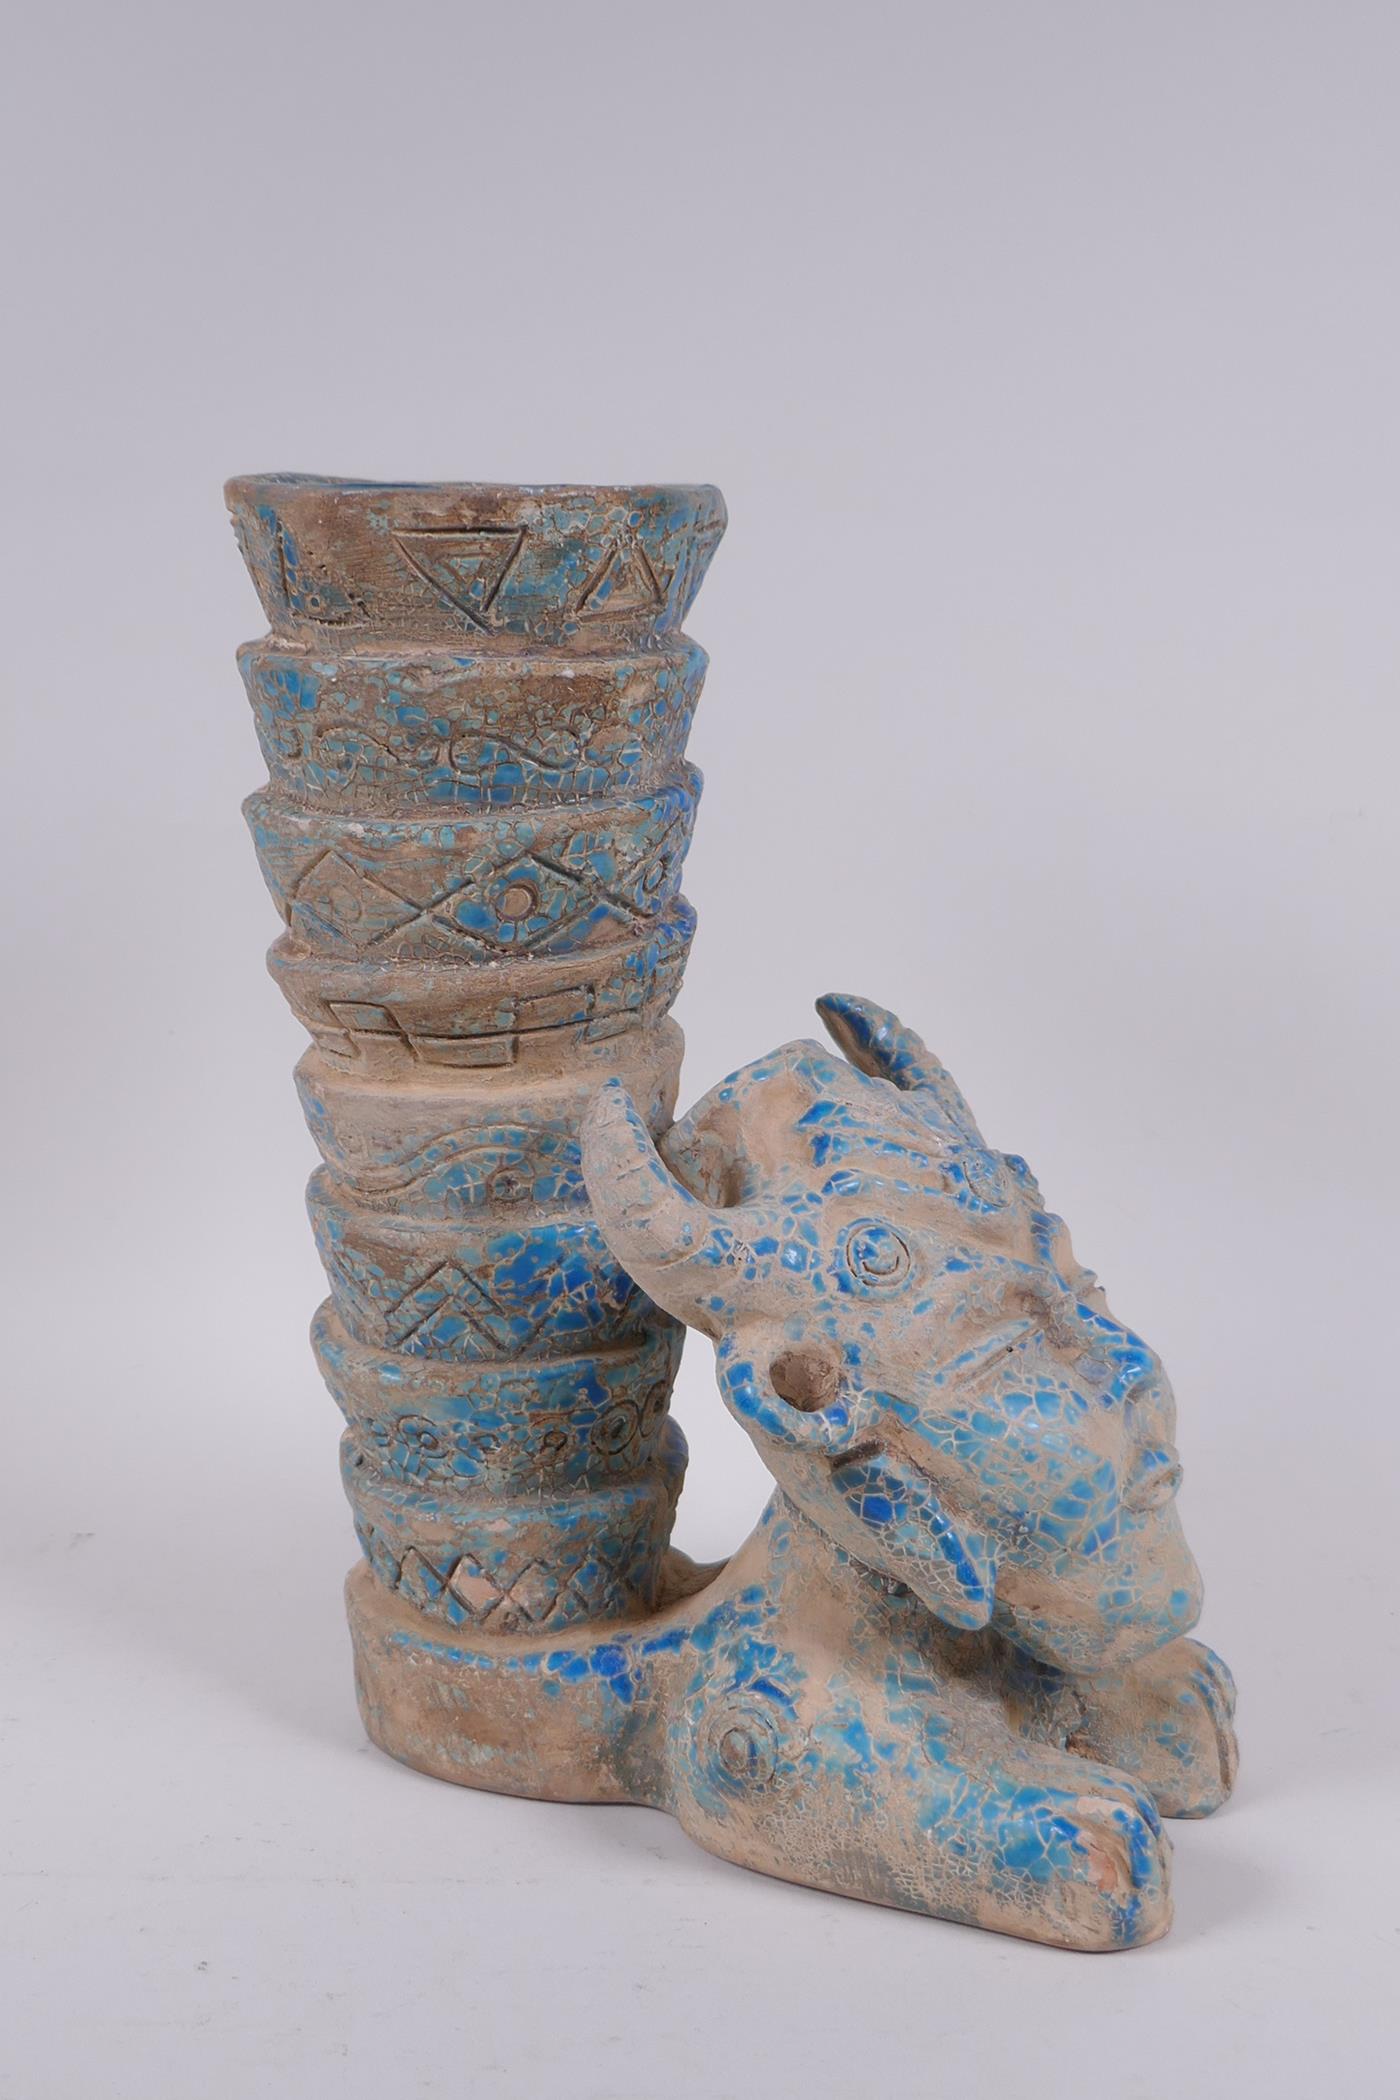 An Islamic earthenware mask vase with turquoise crackle glaze, 25cm high - Image 3 of 5